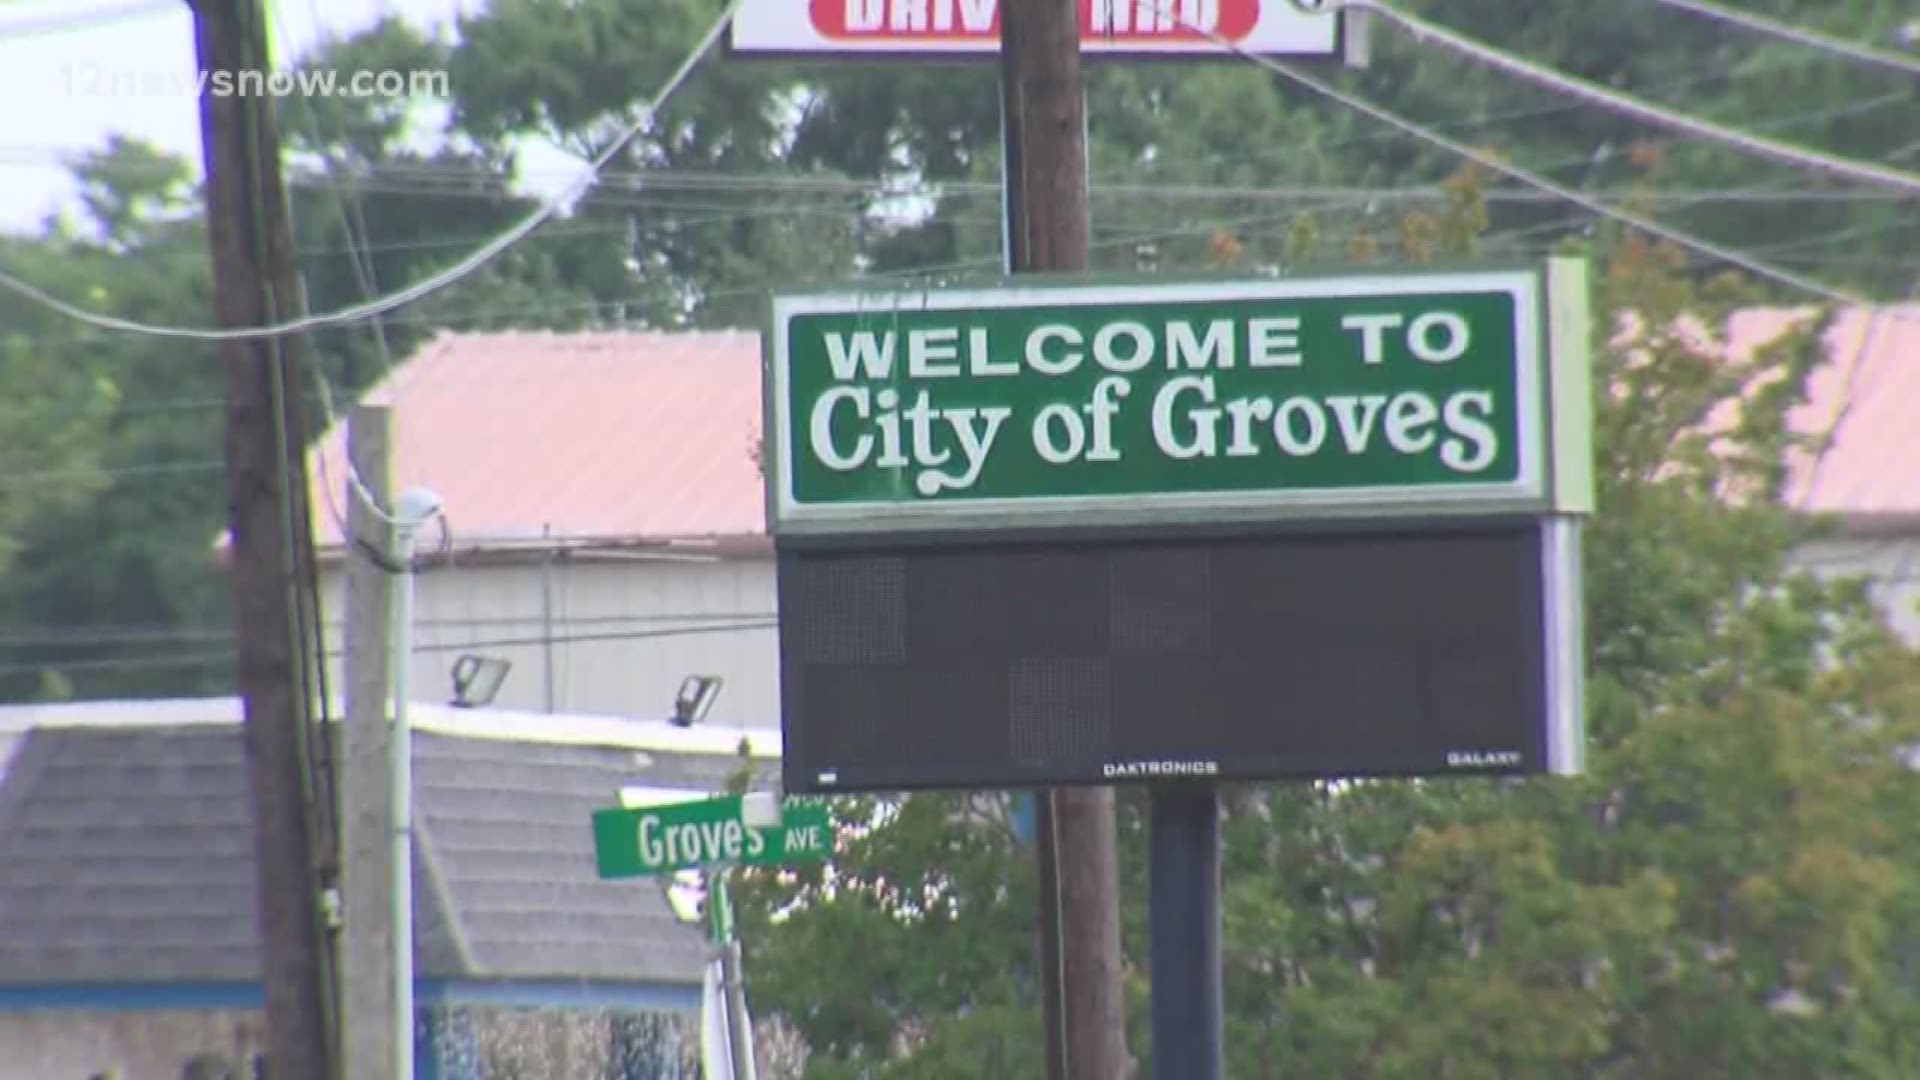 12News Reporter Royden Ogletree found out how Groves residents would spend their Lottery winnings.